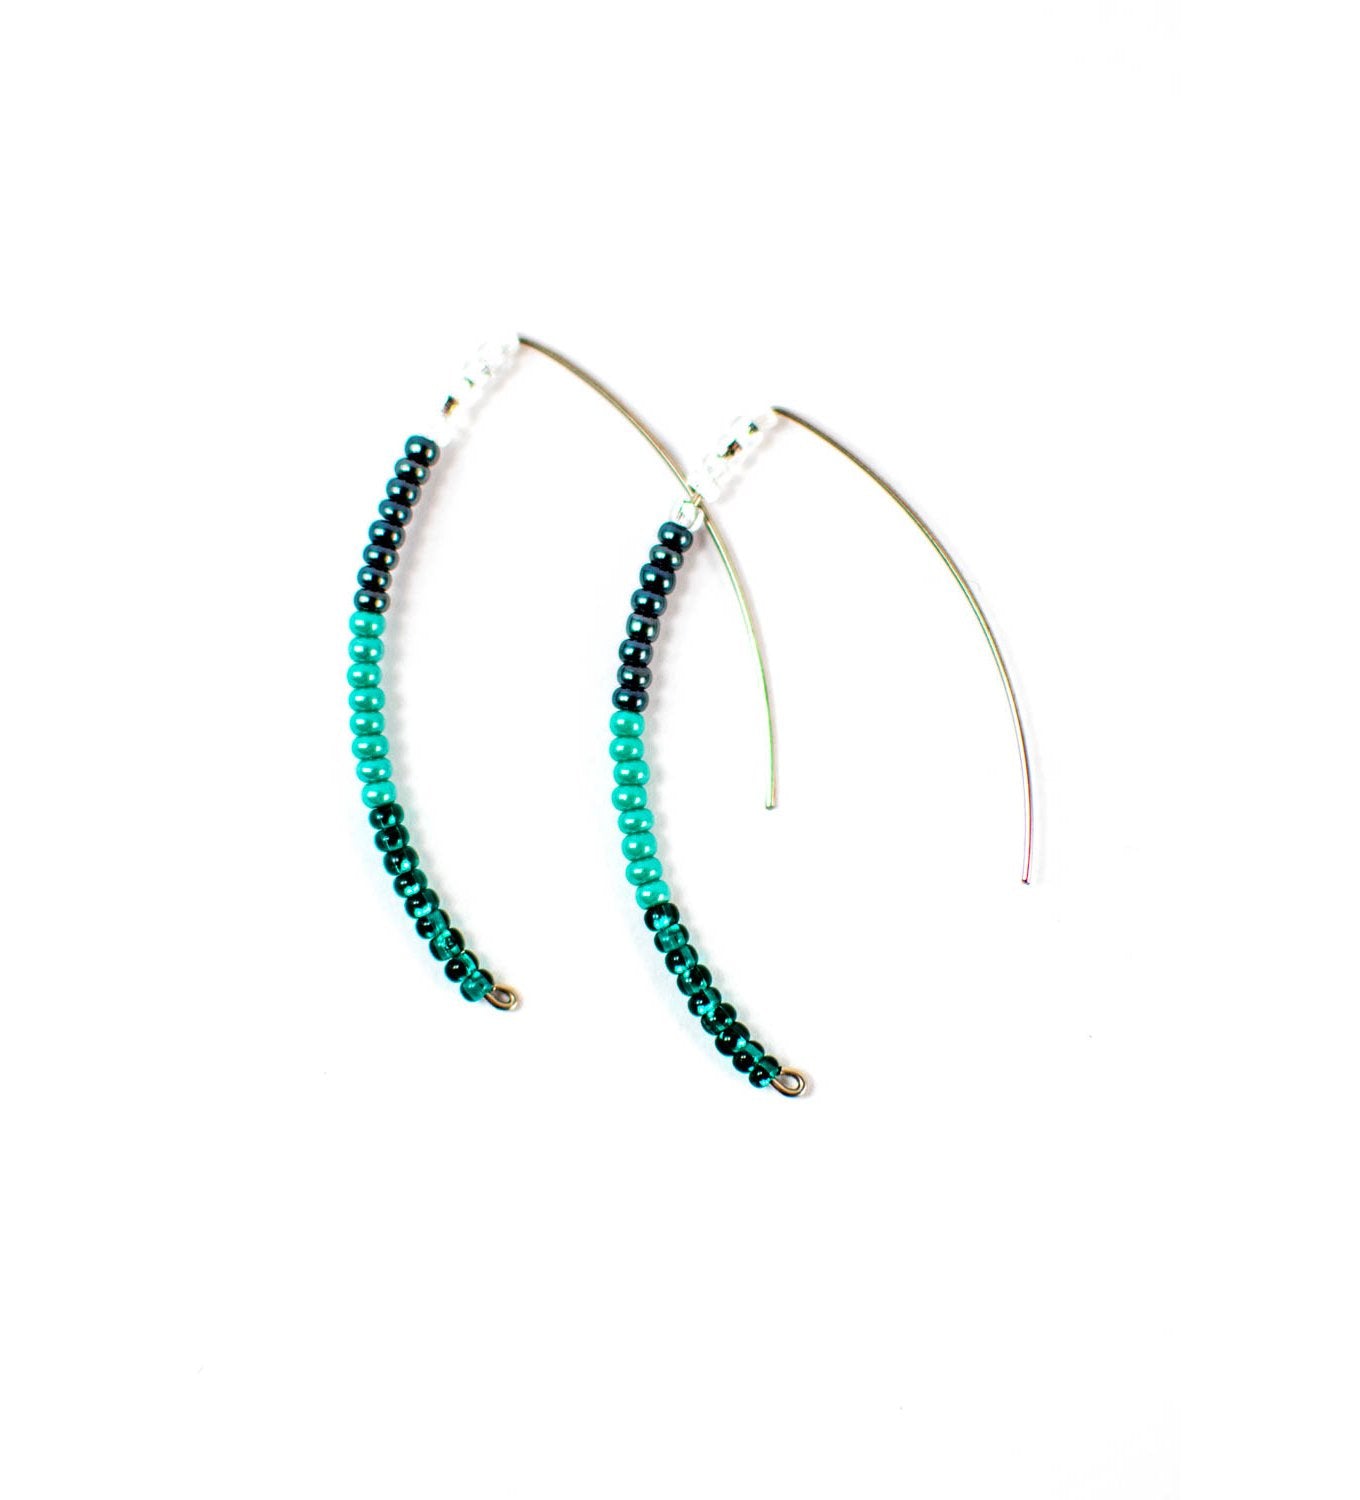 Lucia's World Emporium Fair Trade Handmade Beaded Styx Earrings from Guatemala in Turquoise